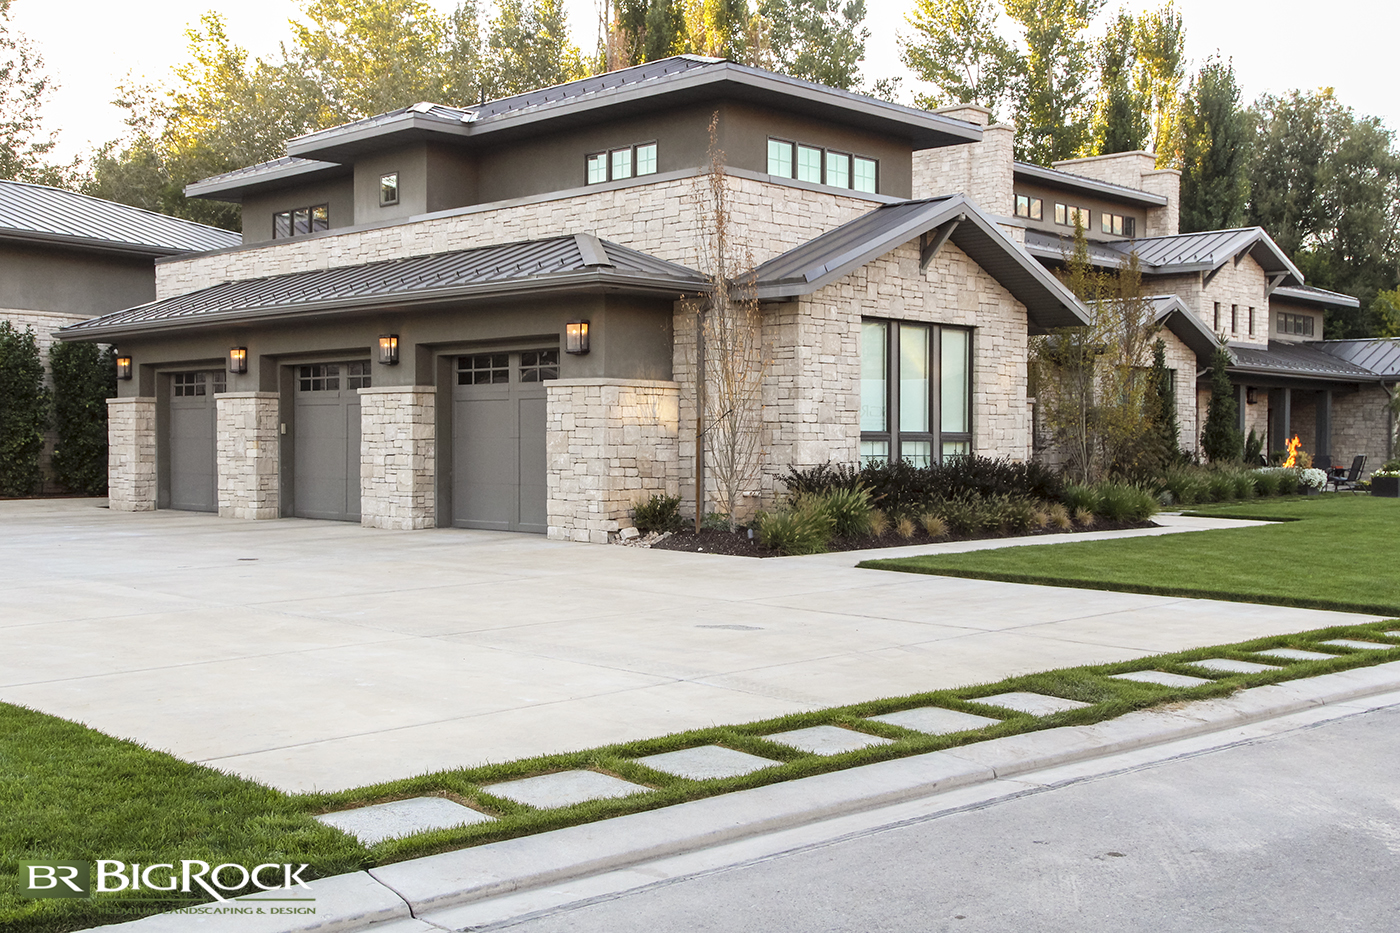 A driveway doesn't have to be boring and solid cement. Create a functional entrance into your driveway with pavers and grass that is unique and interesting for your landscape.